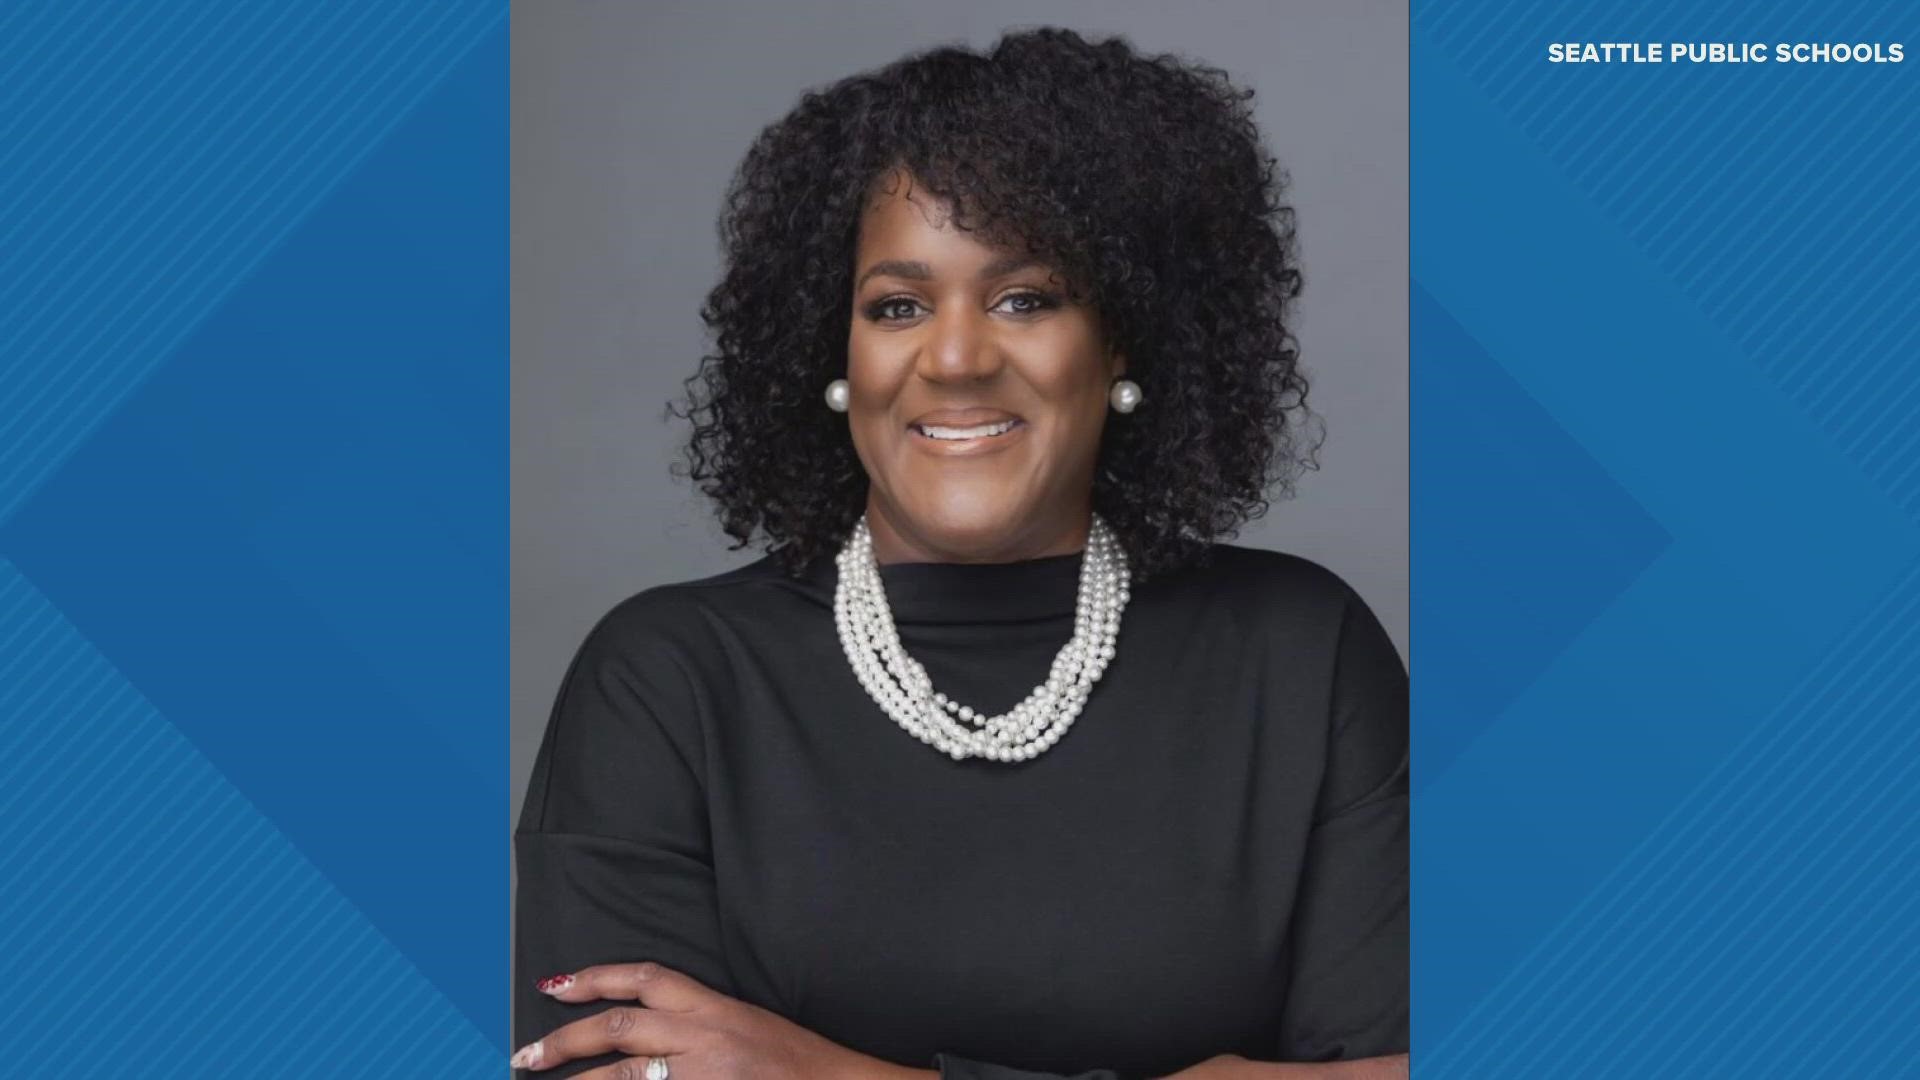 The St. Louis Board of Education announced on Wednesday that it has appointed Keisha Scarlett as the next superintendent of St. Louis Public Schools.